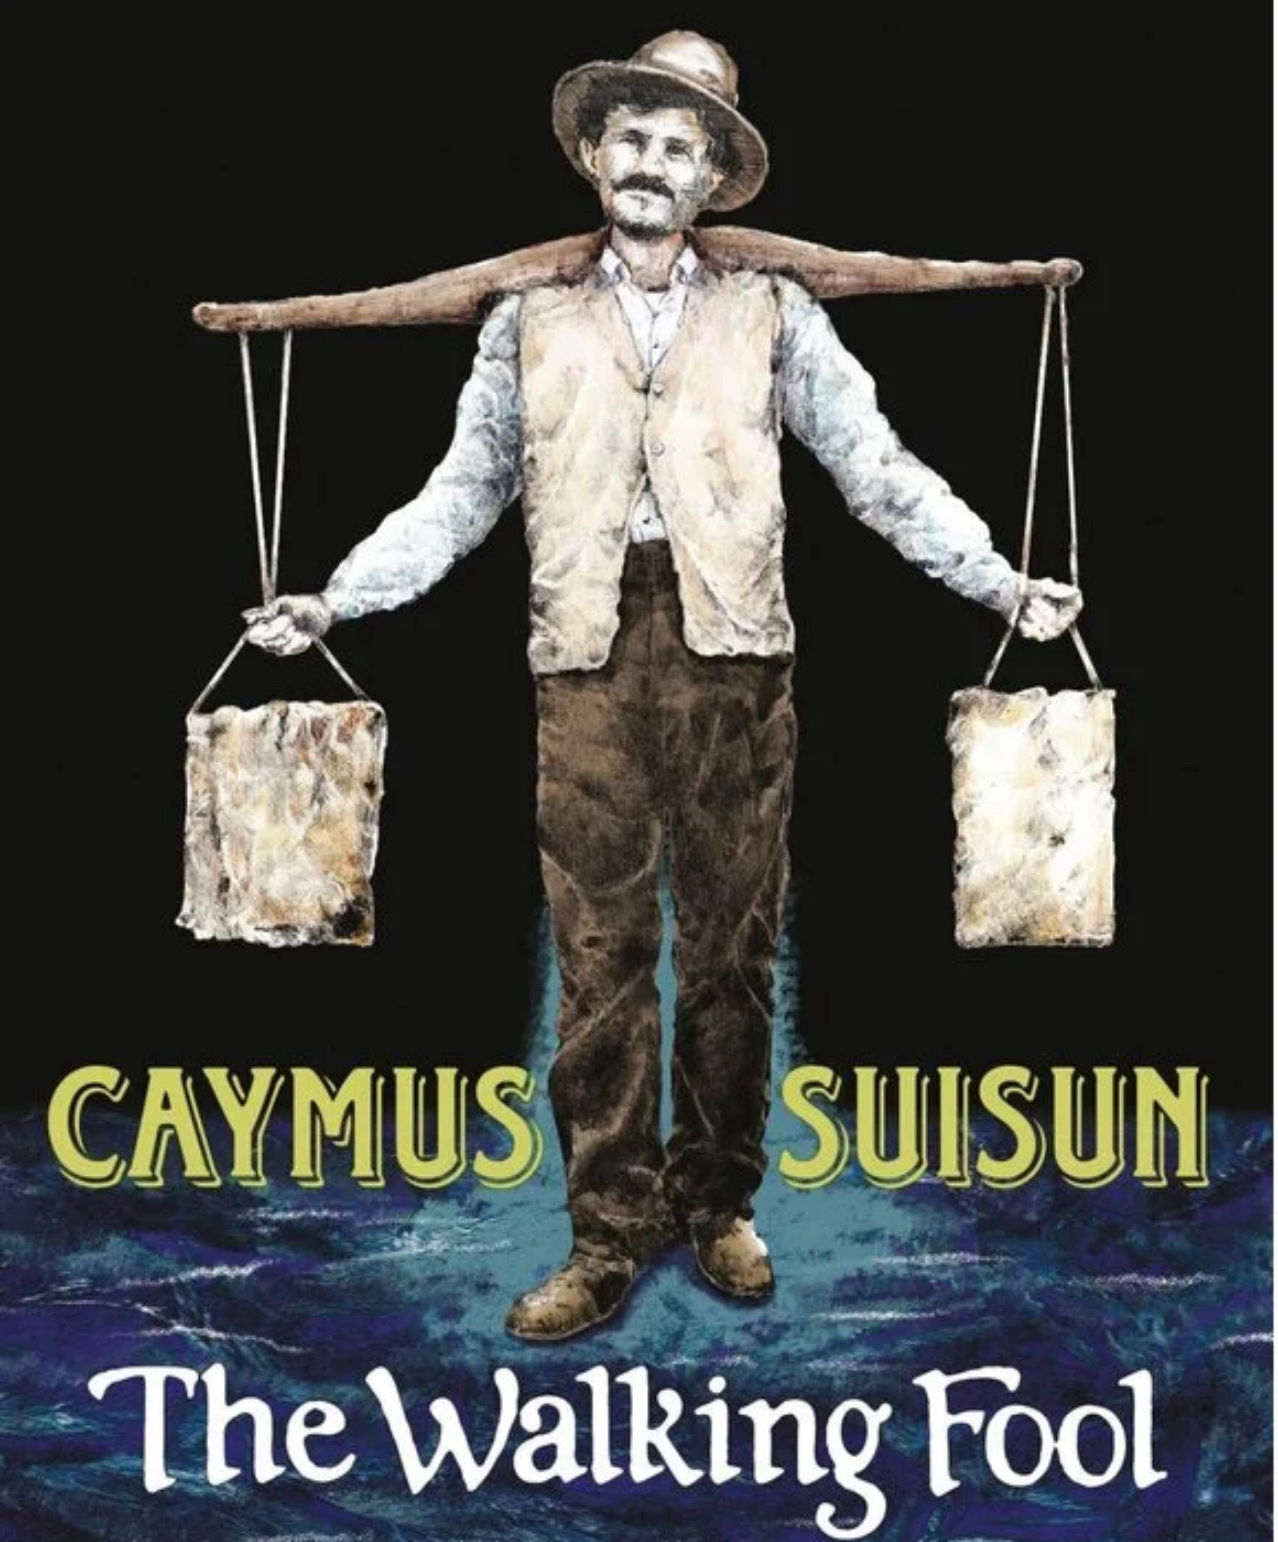 CAYMUS SUISUN (The Walking Fool" RED BLEND